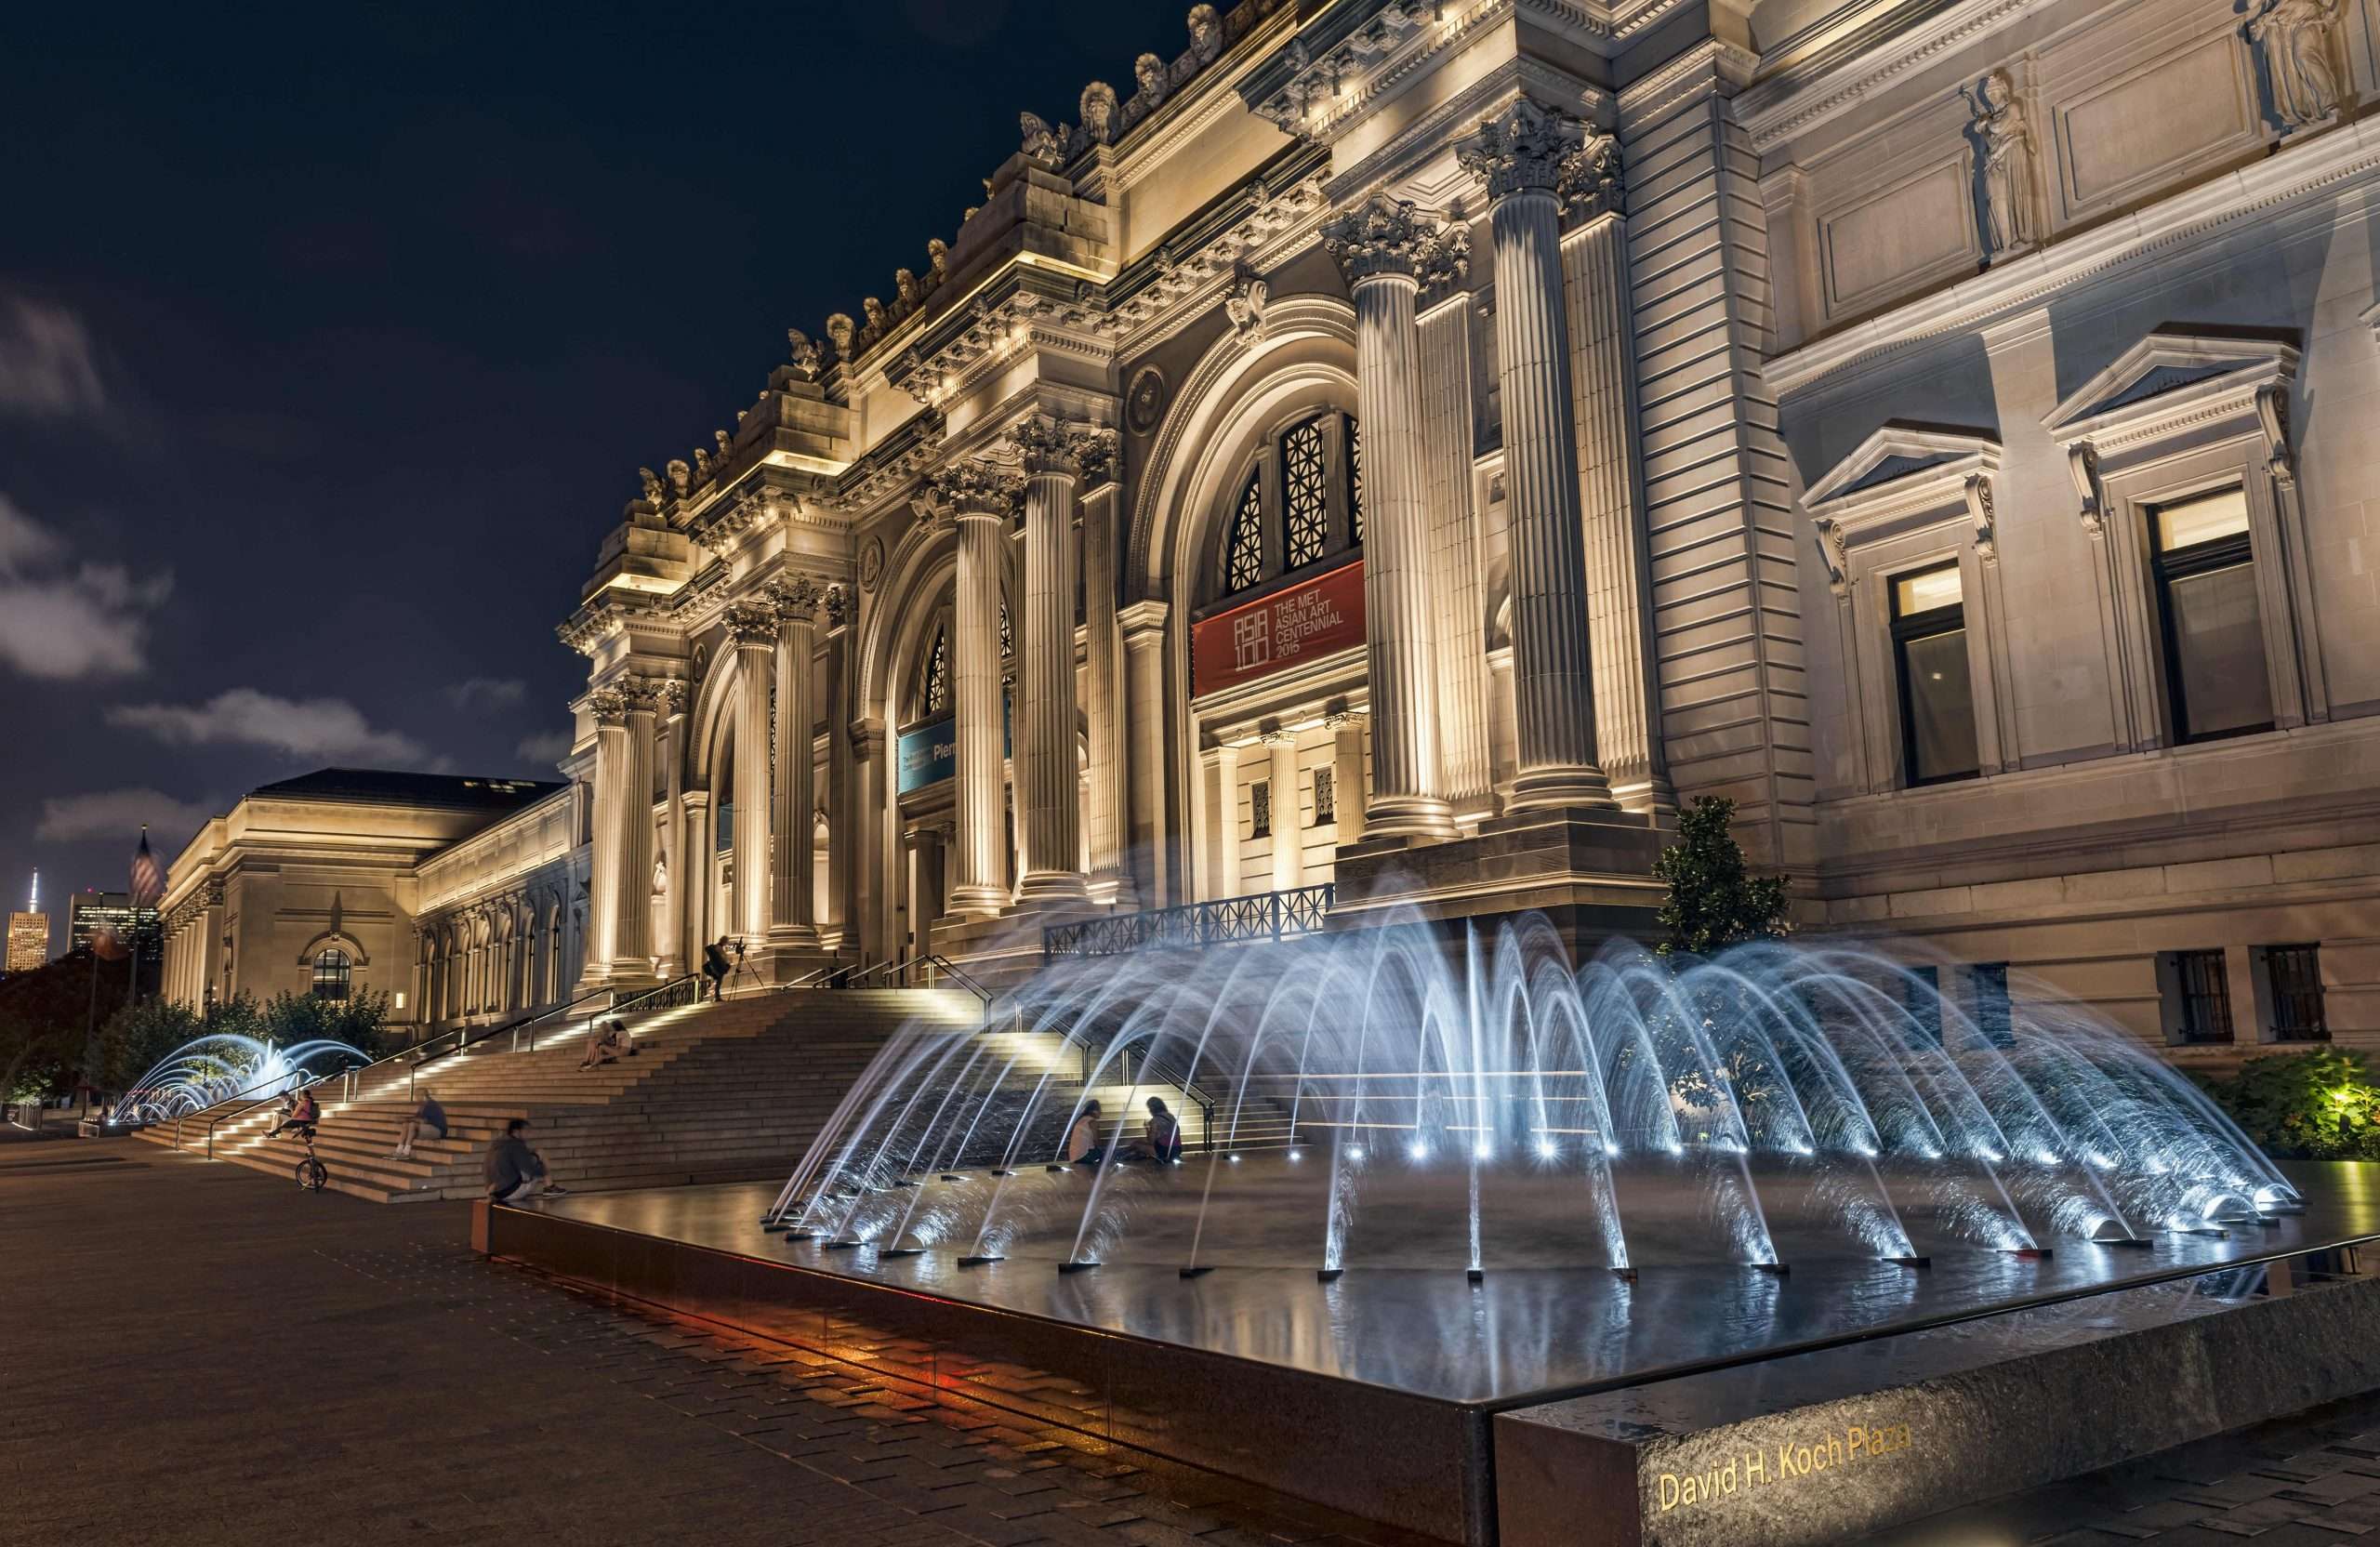 See New York museums for free in